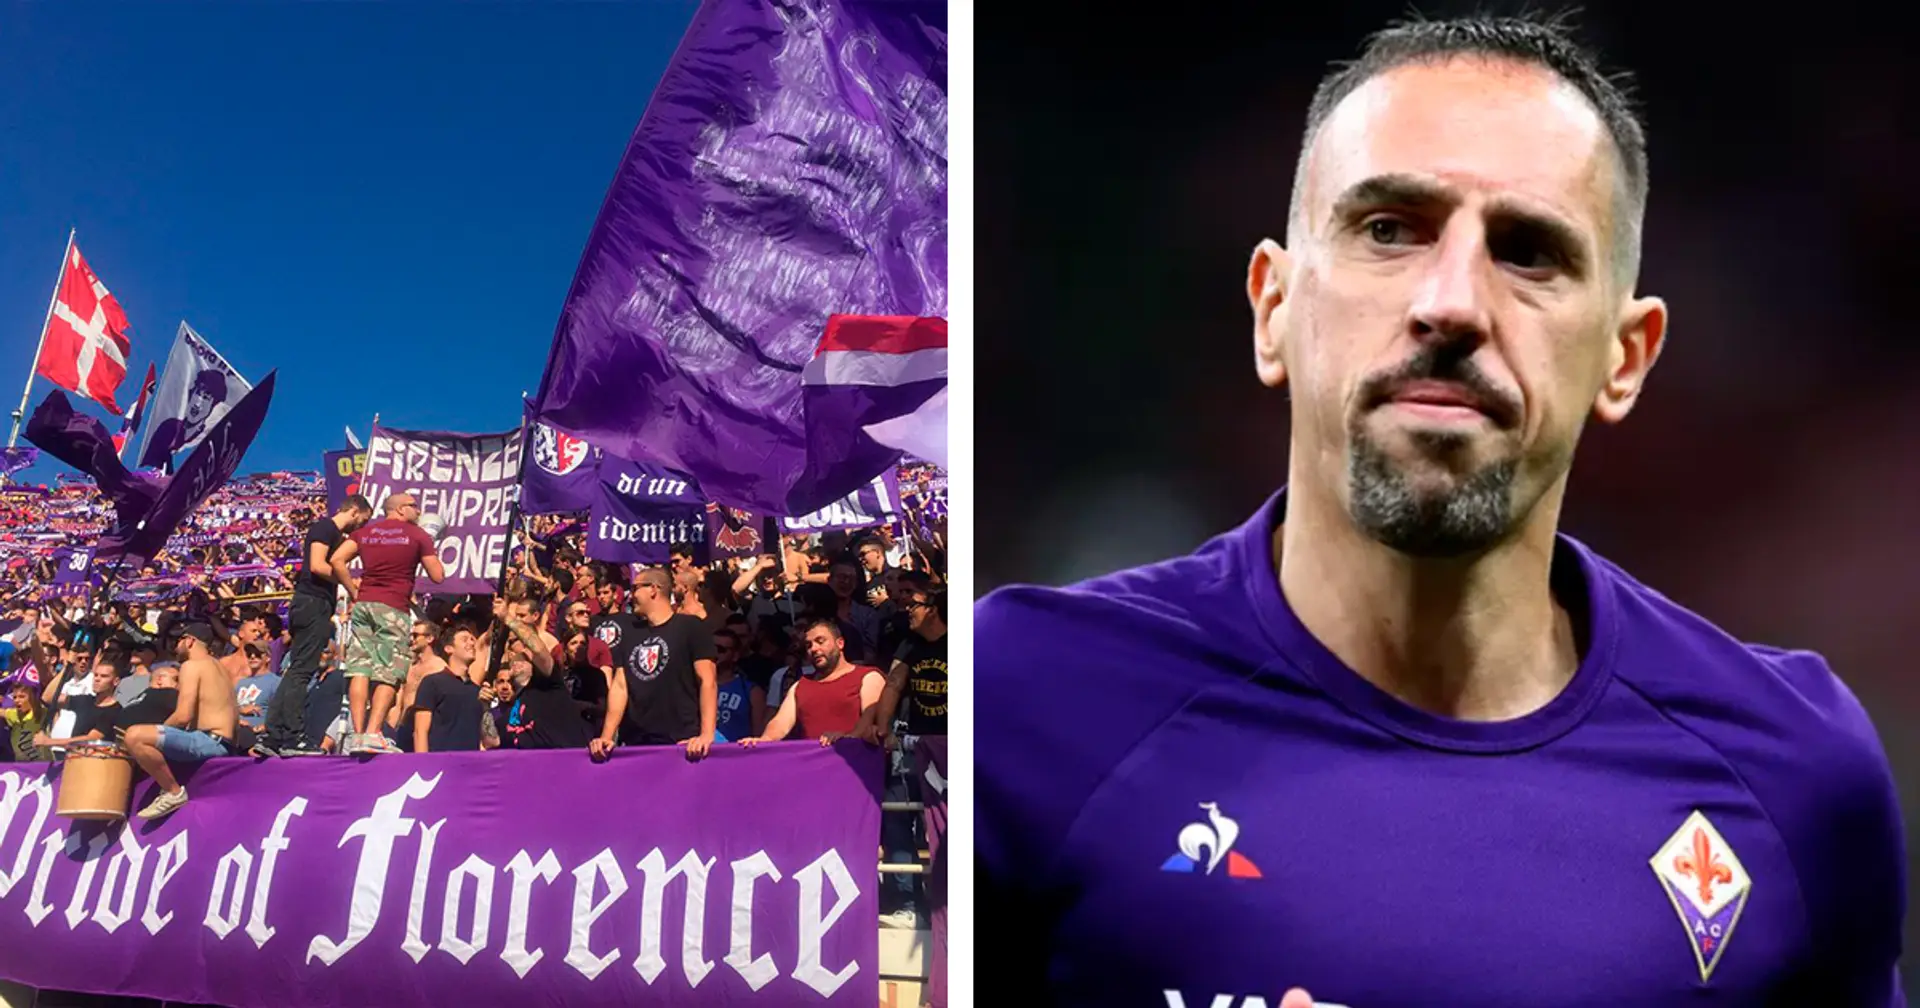 'Wash your mouth out before talking about Florence like that':  Fiorentina ultras hit back at Ribery